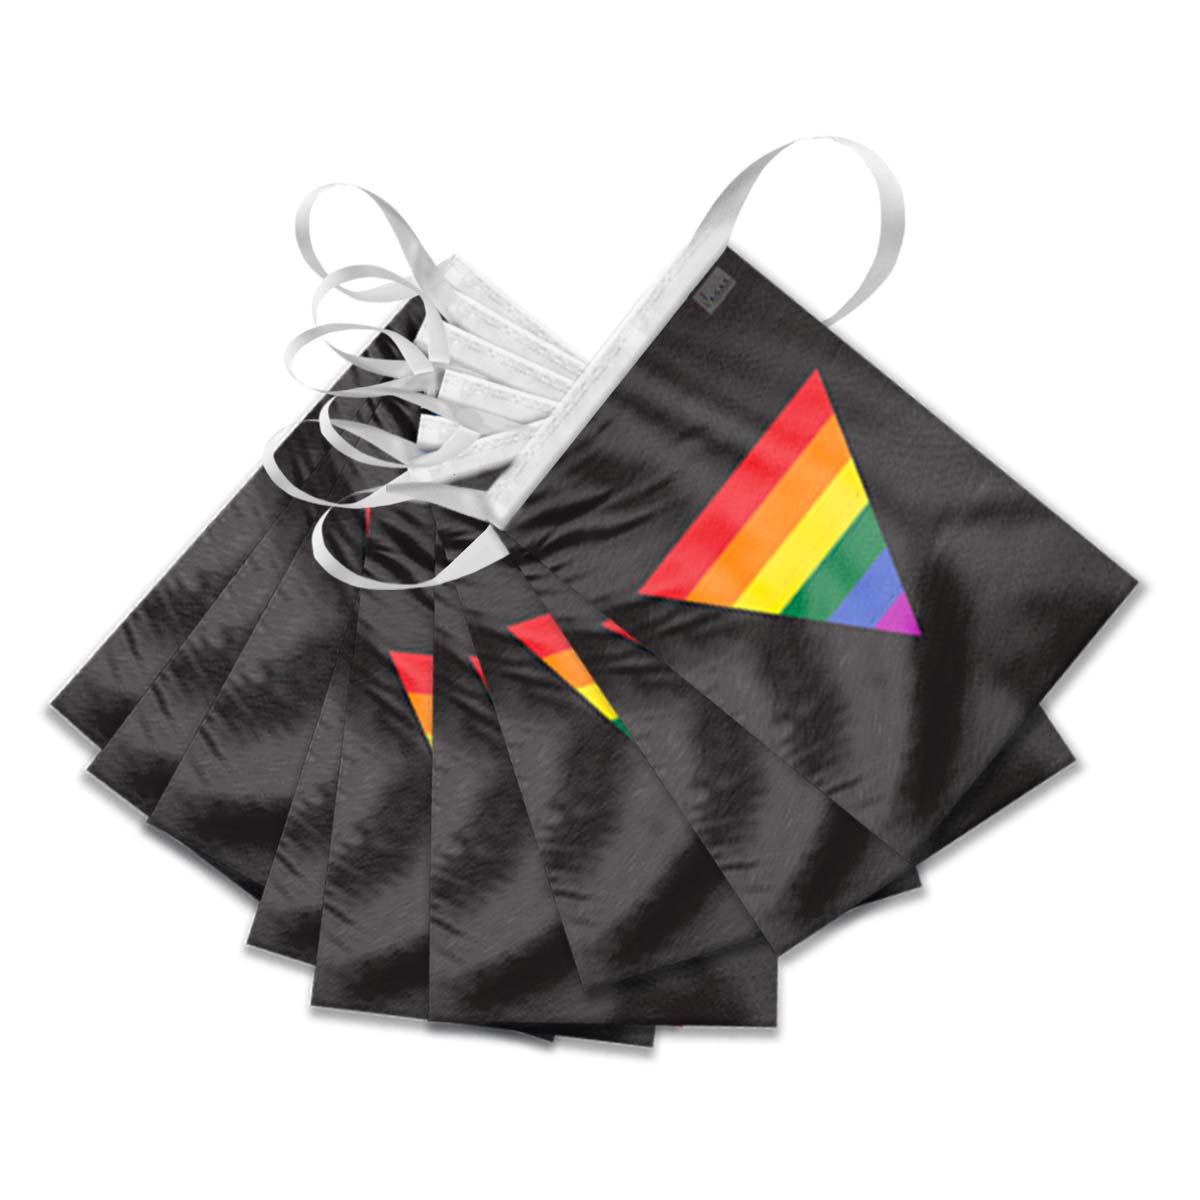 AGAS Black Rainbow Triangle Streamers for Party 60 Ft long - 5 Mil Plastic